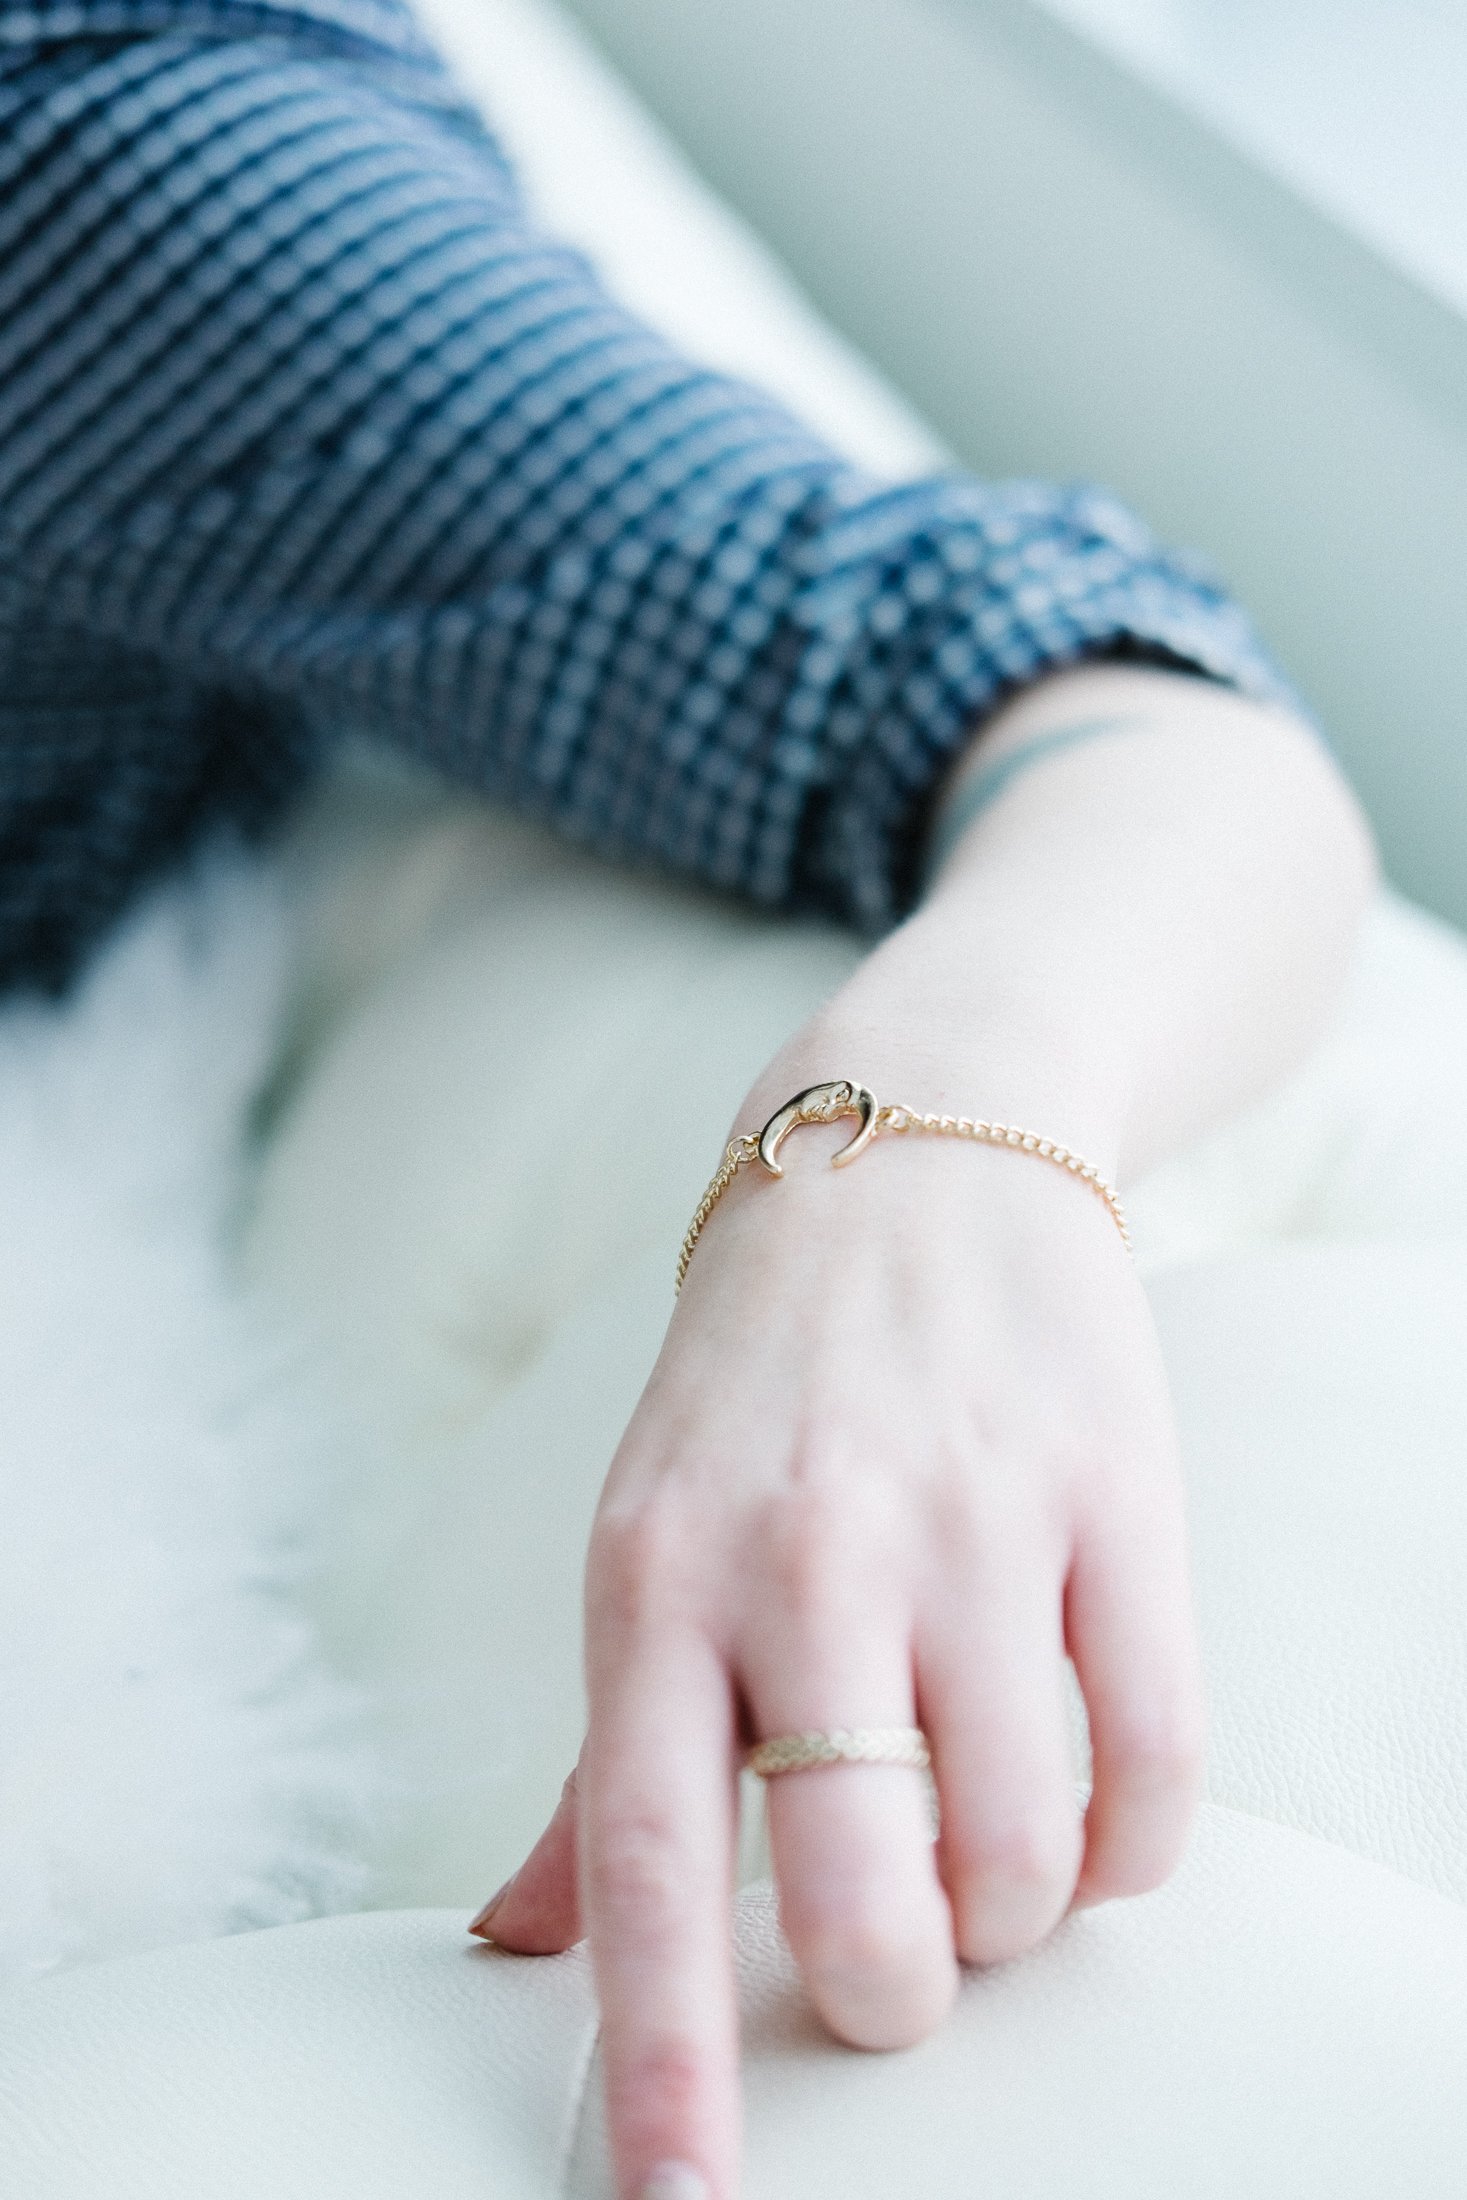 Hand with Gold and Silver Bracelets · Free Stock Photo